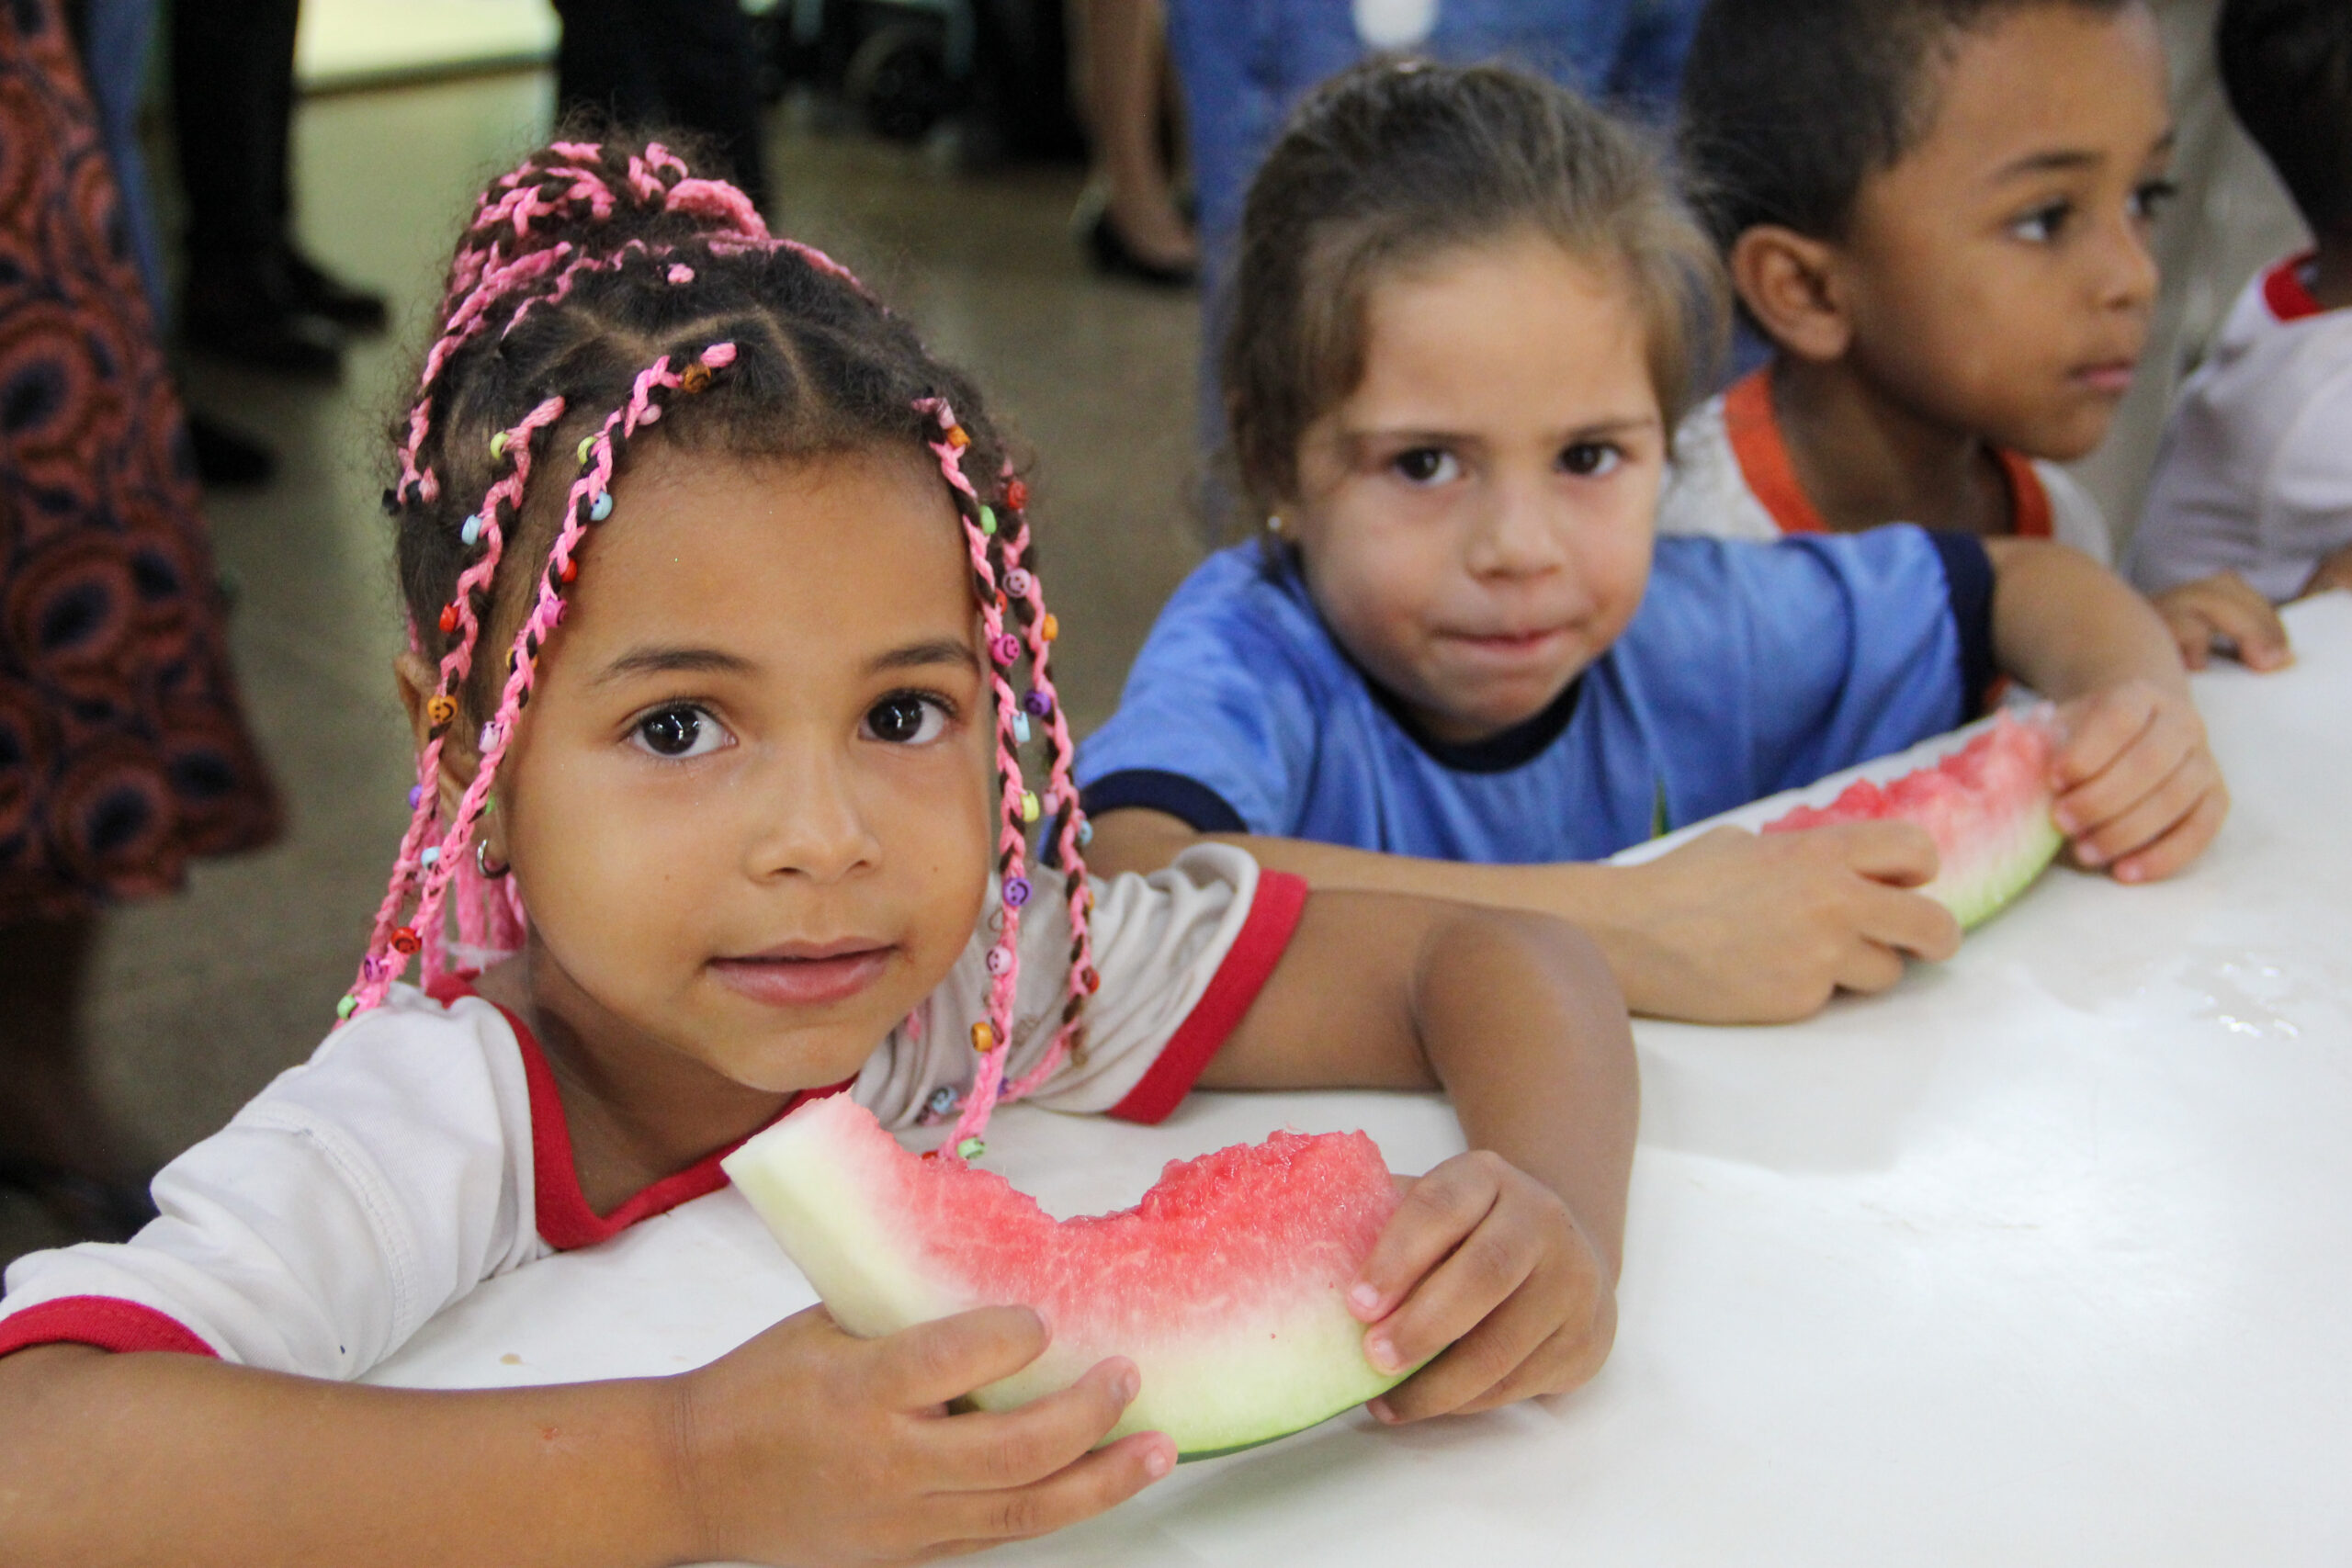 The photo shows three children, a black girl with pink braids in her hair eating a watermelon wearing a white blouse with red details from the school uniform, a white girl with straight hair eating a watermelon wearing a blue blouse, and a black boy wearing a white blouse with orange details from the school uniform.